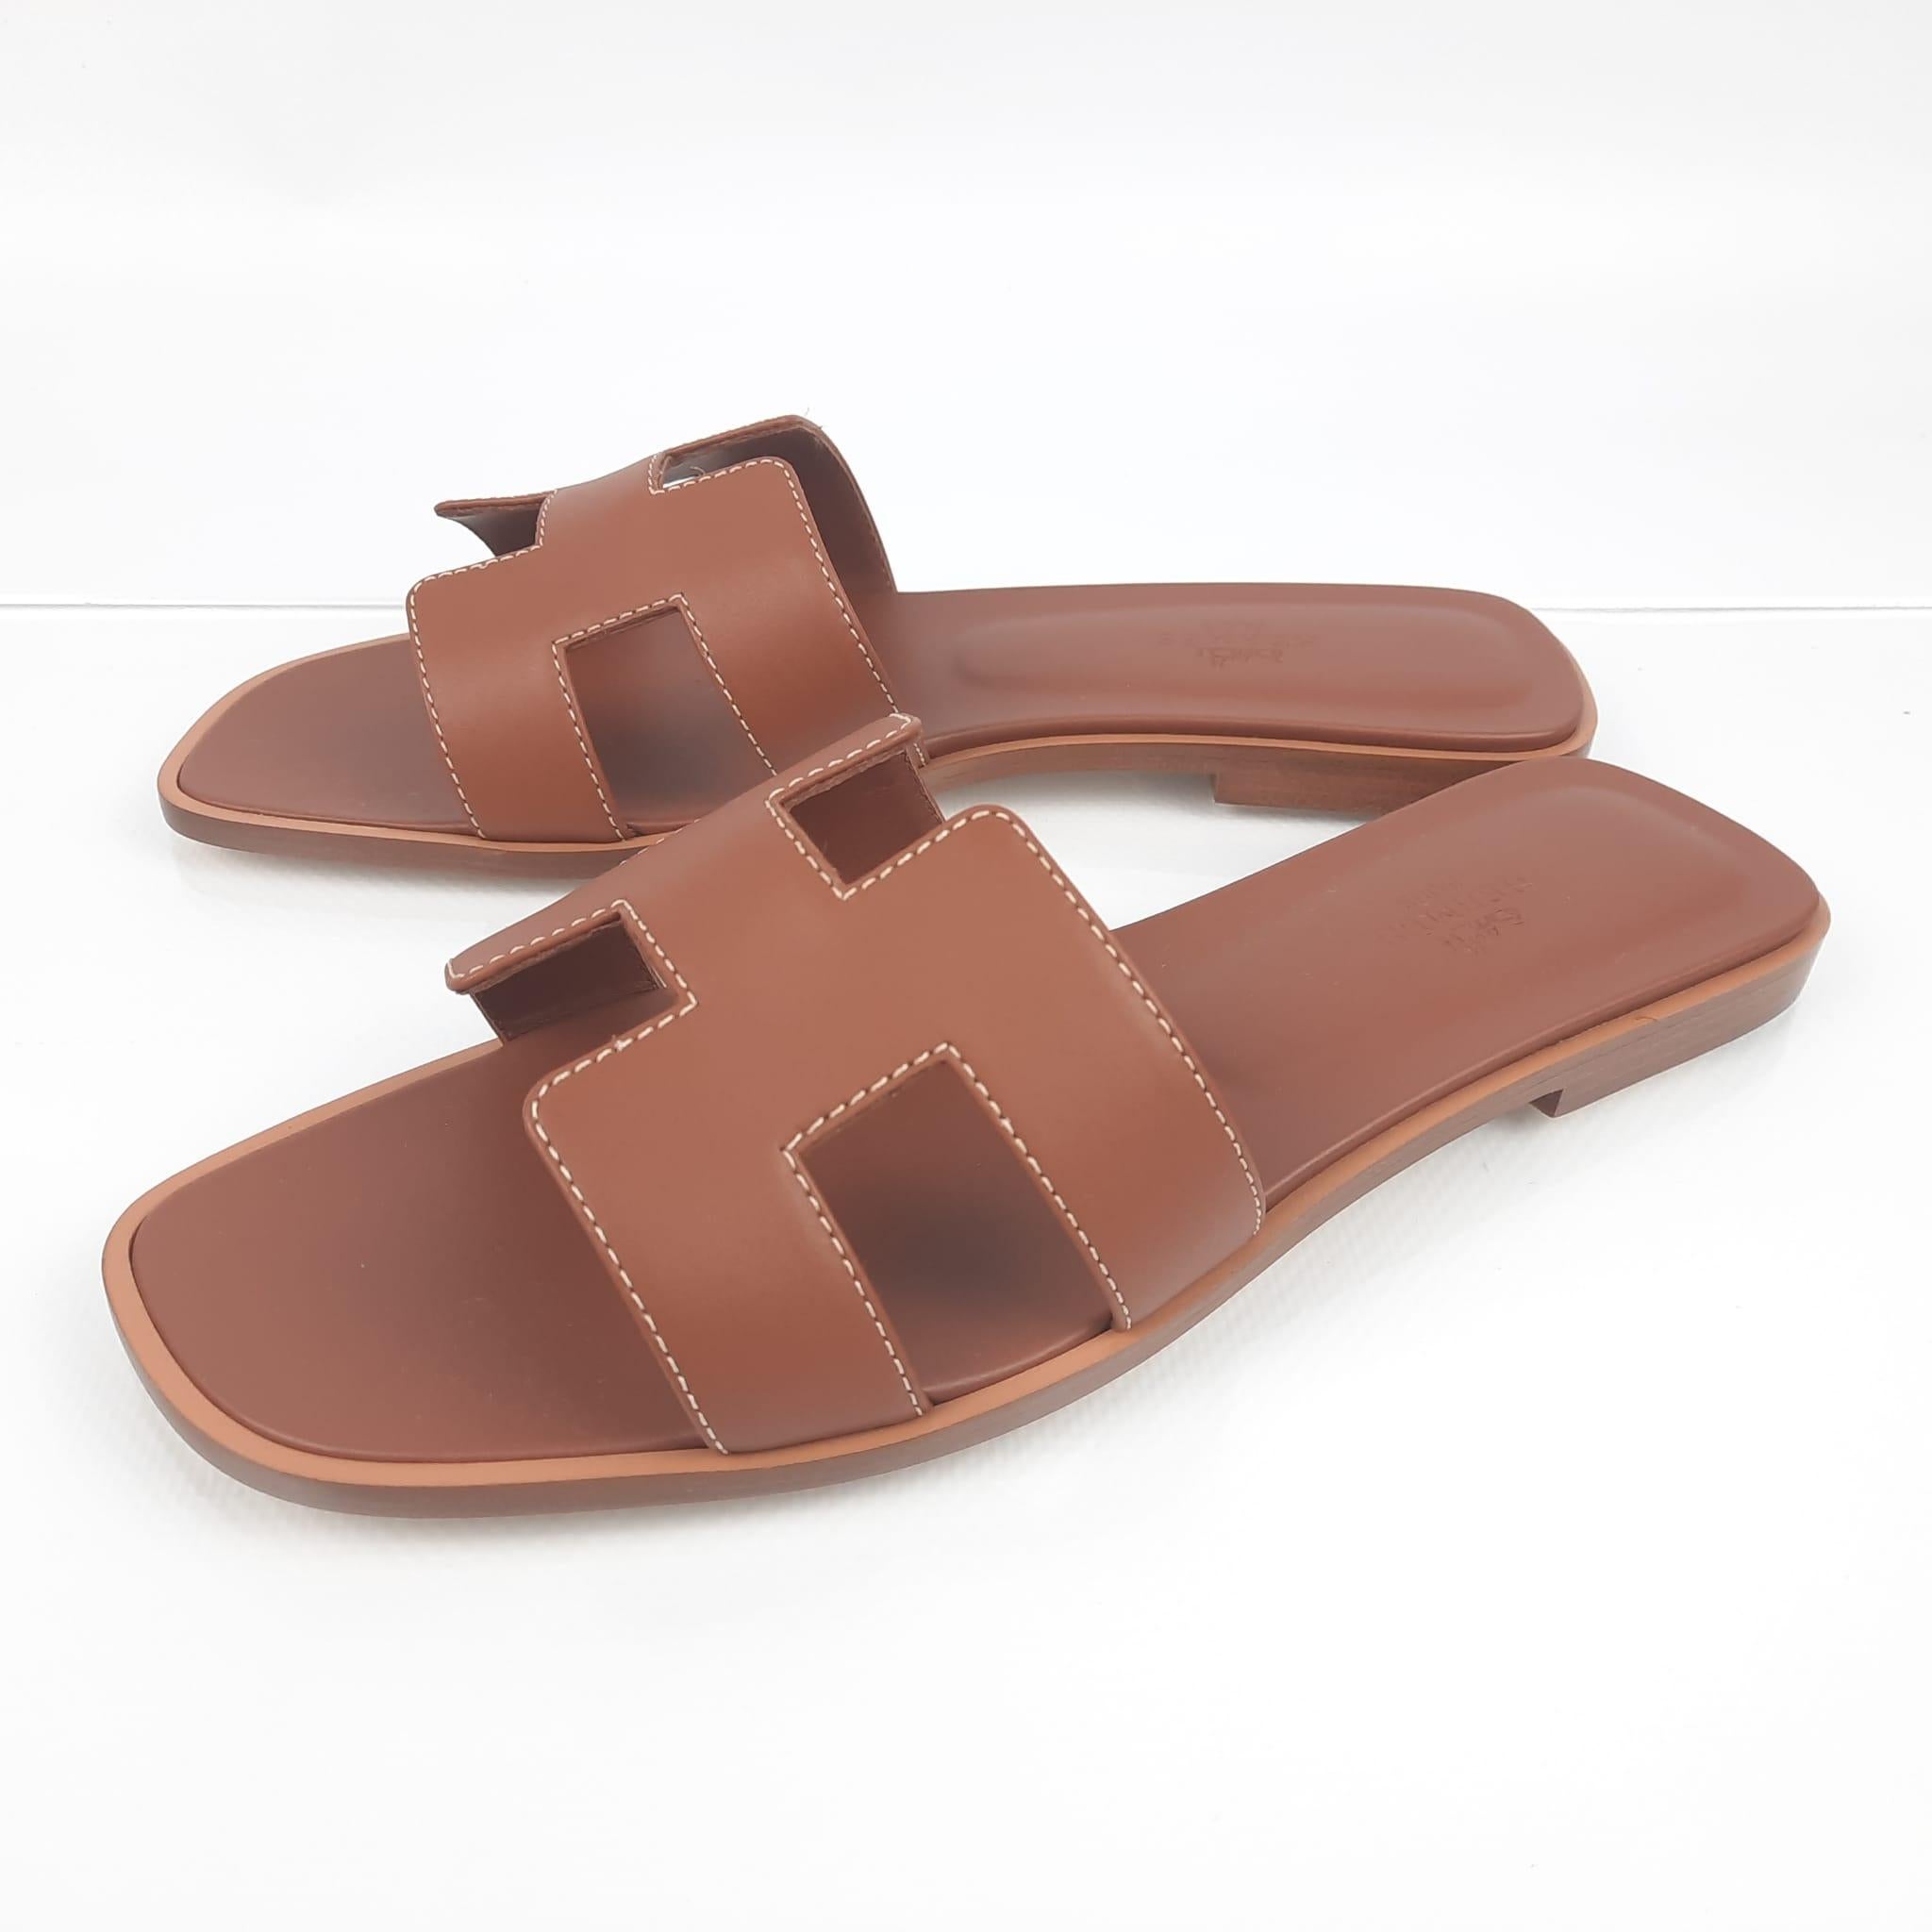 Size 39
Sandal in Box calfskin with iconic 